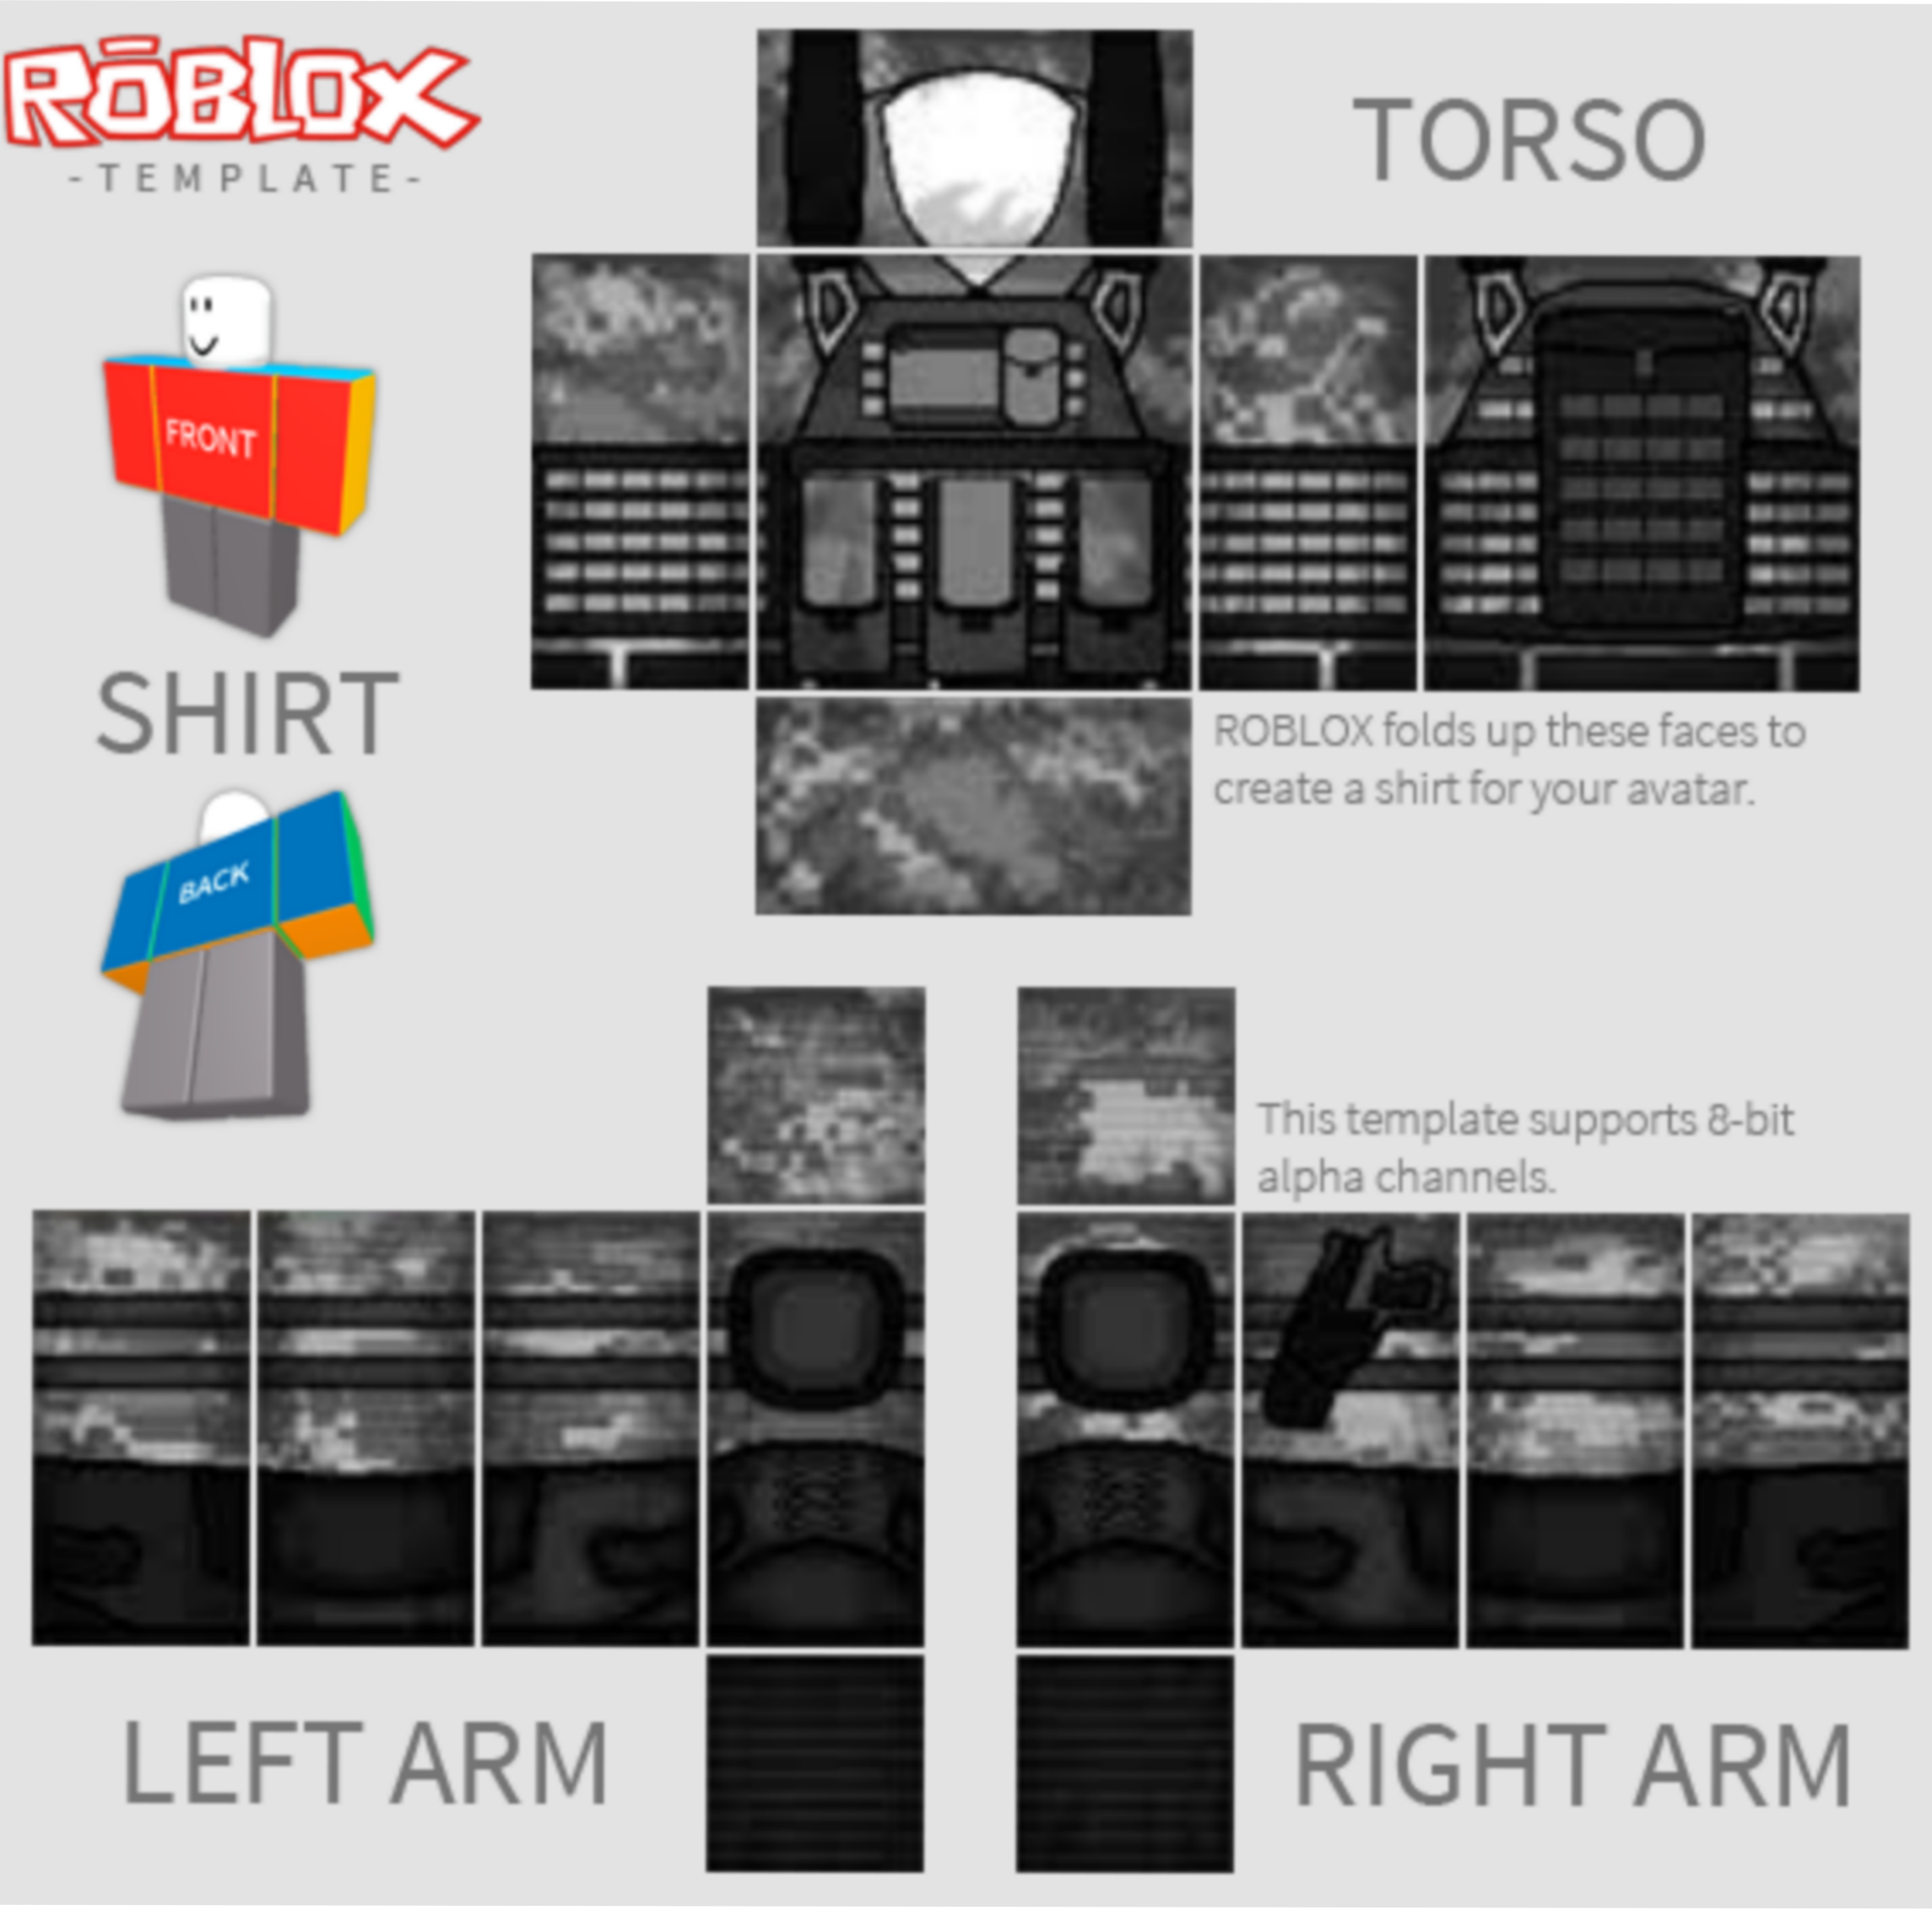 Roblox Template Swat Shirt Image By Guicorreia13795 - roblox video of swat vs